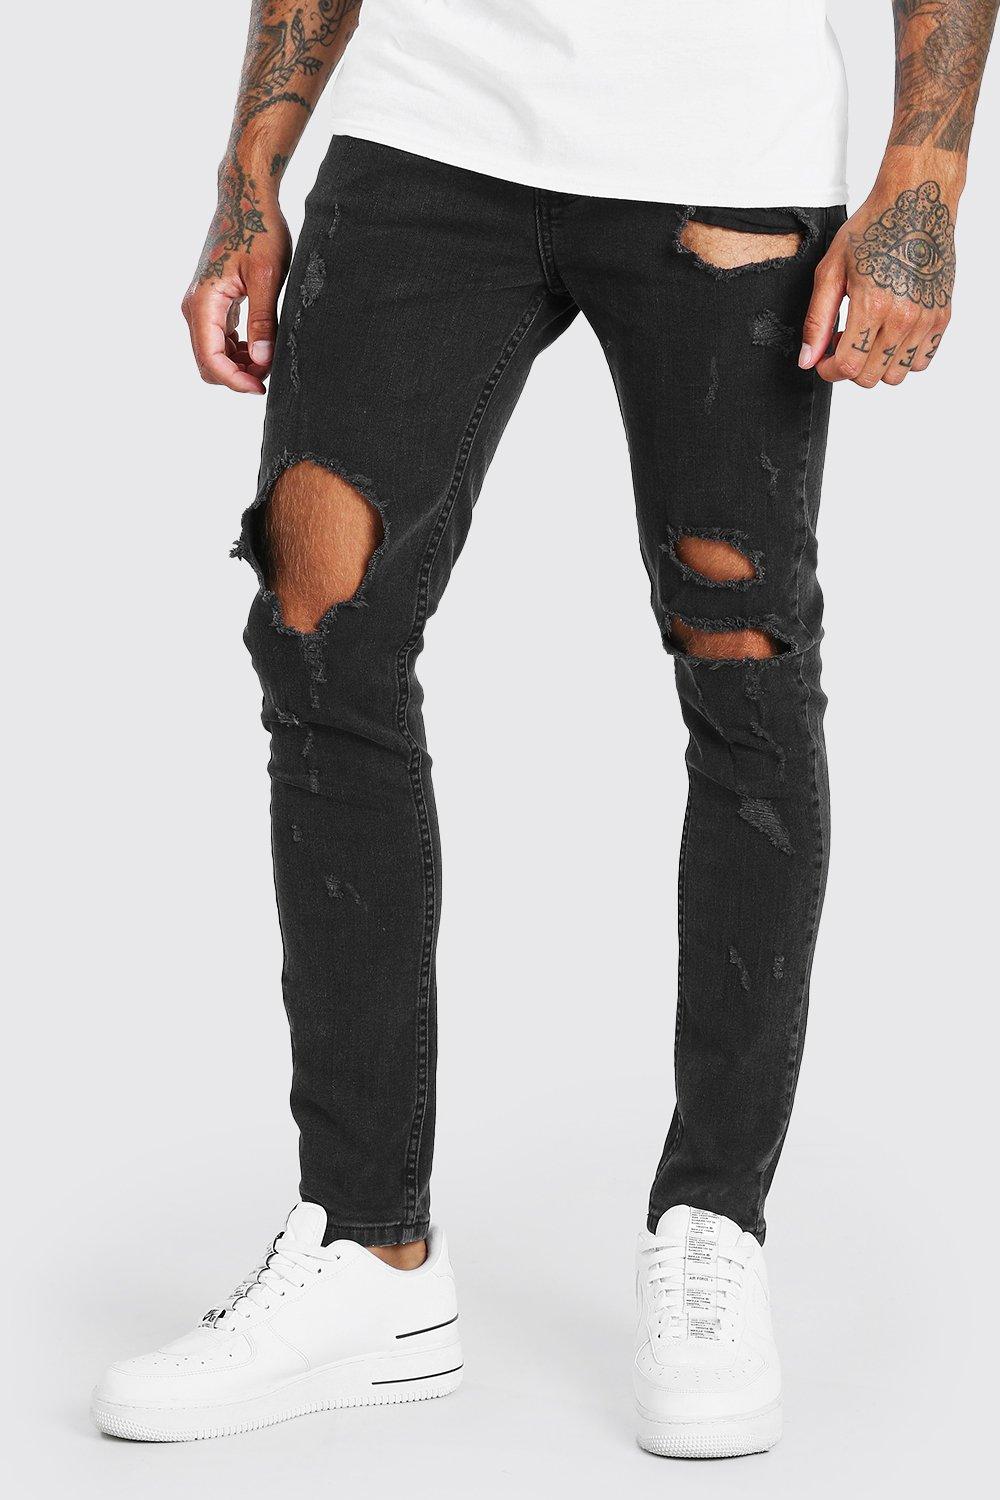 black ripped jeans canada